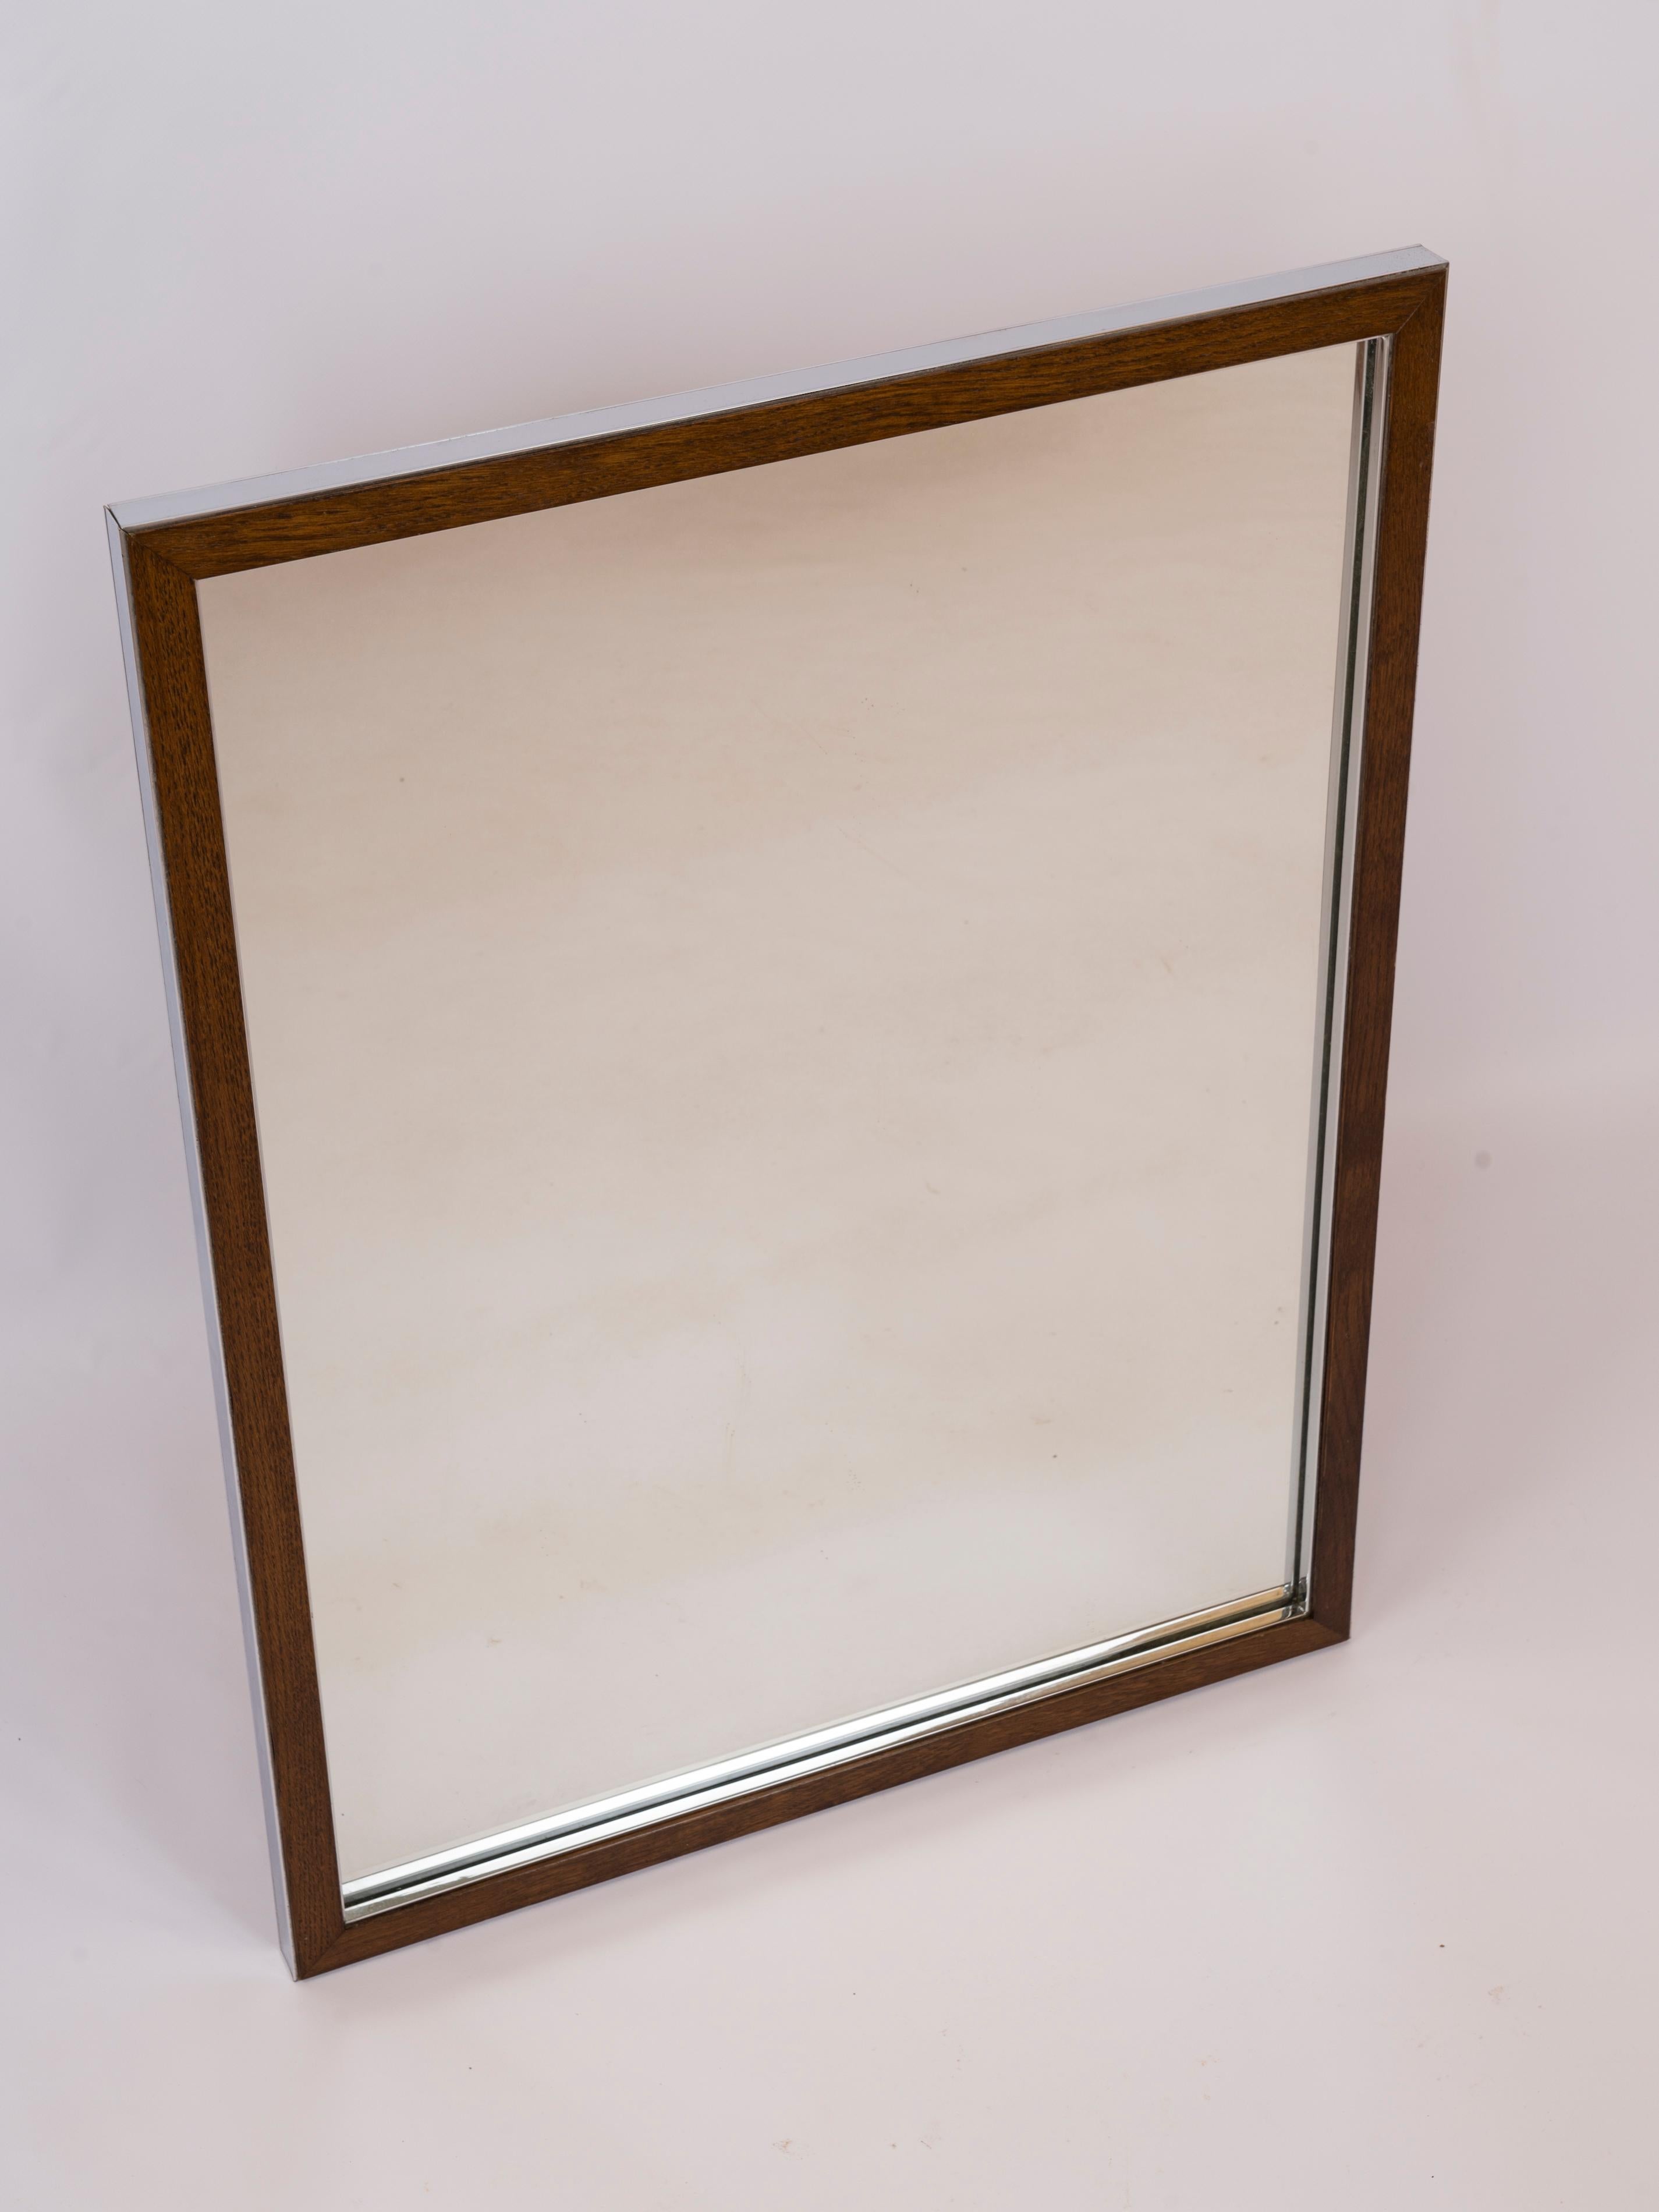 Sleek modernist mirror made of a teakwood frame embedded into a chrome structure. 
Italy 1970's.
In good vintage condition.
This mirror will ship from France and can be returned to either France or to a LIC NY location.
Price does not include